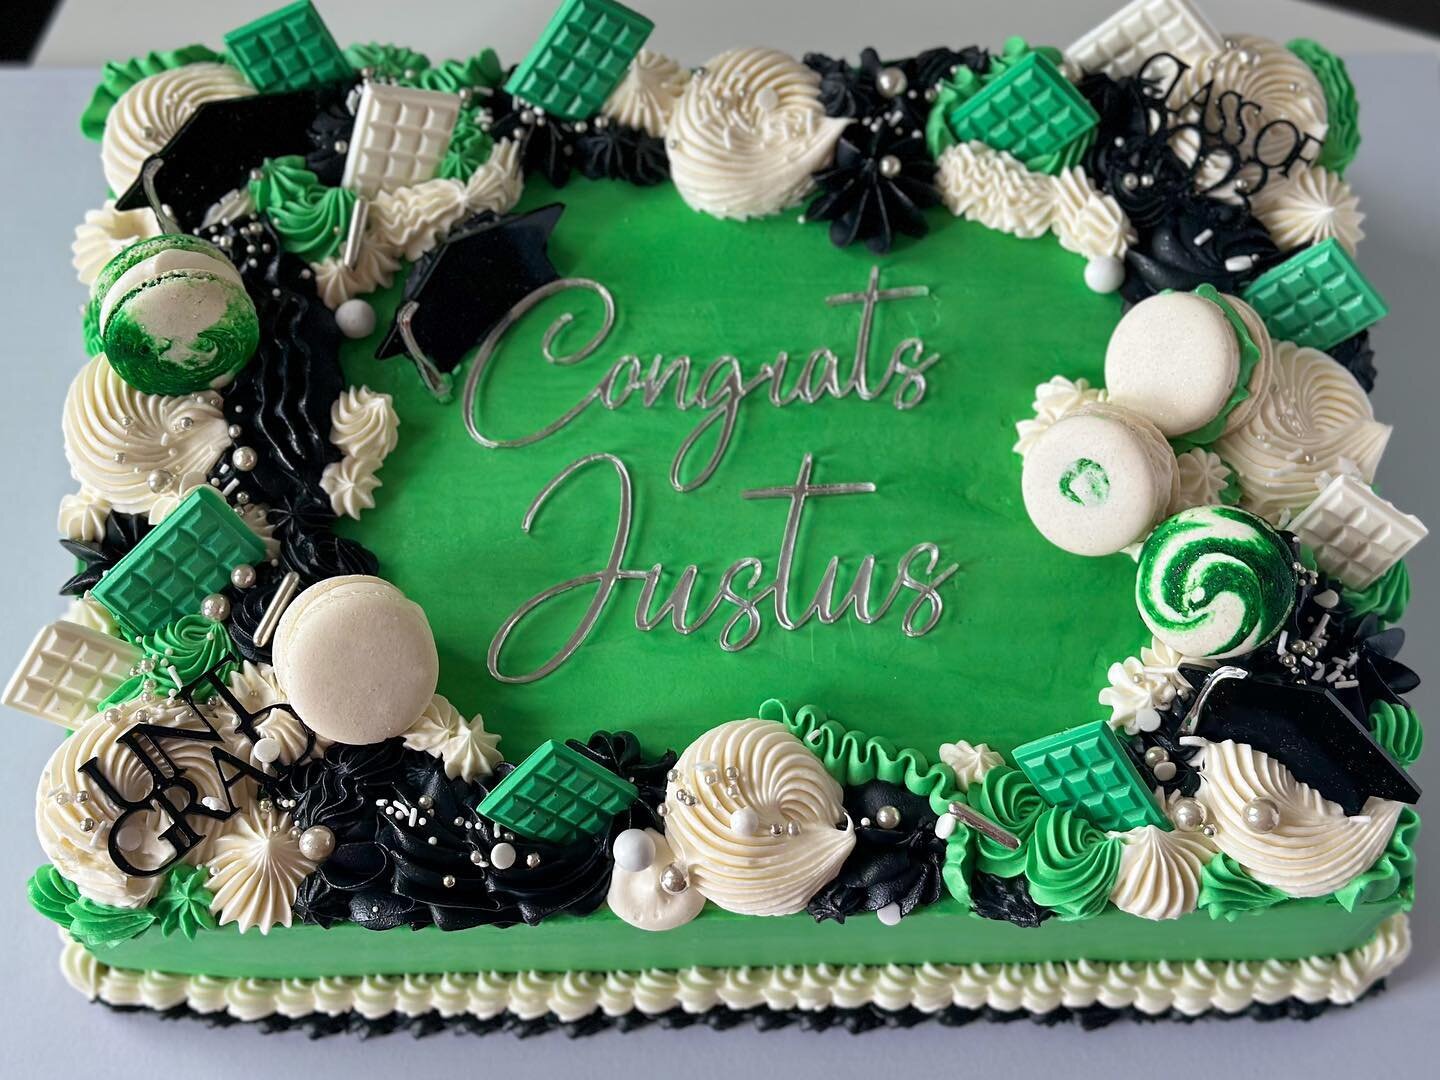 Congrats Justus 🎓
.
Half vanilla and chocolate sheet cake covered in our delicious Swiss buttercream adorned with handmade Italian macarons and luxury chocolate.
.
Grad season is here - our sheet cakes are the perfect table centerpiece for your 2023